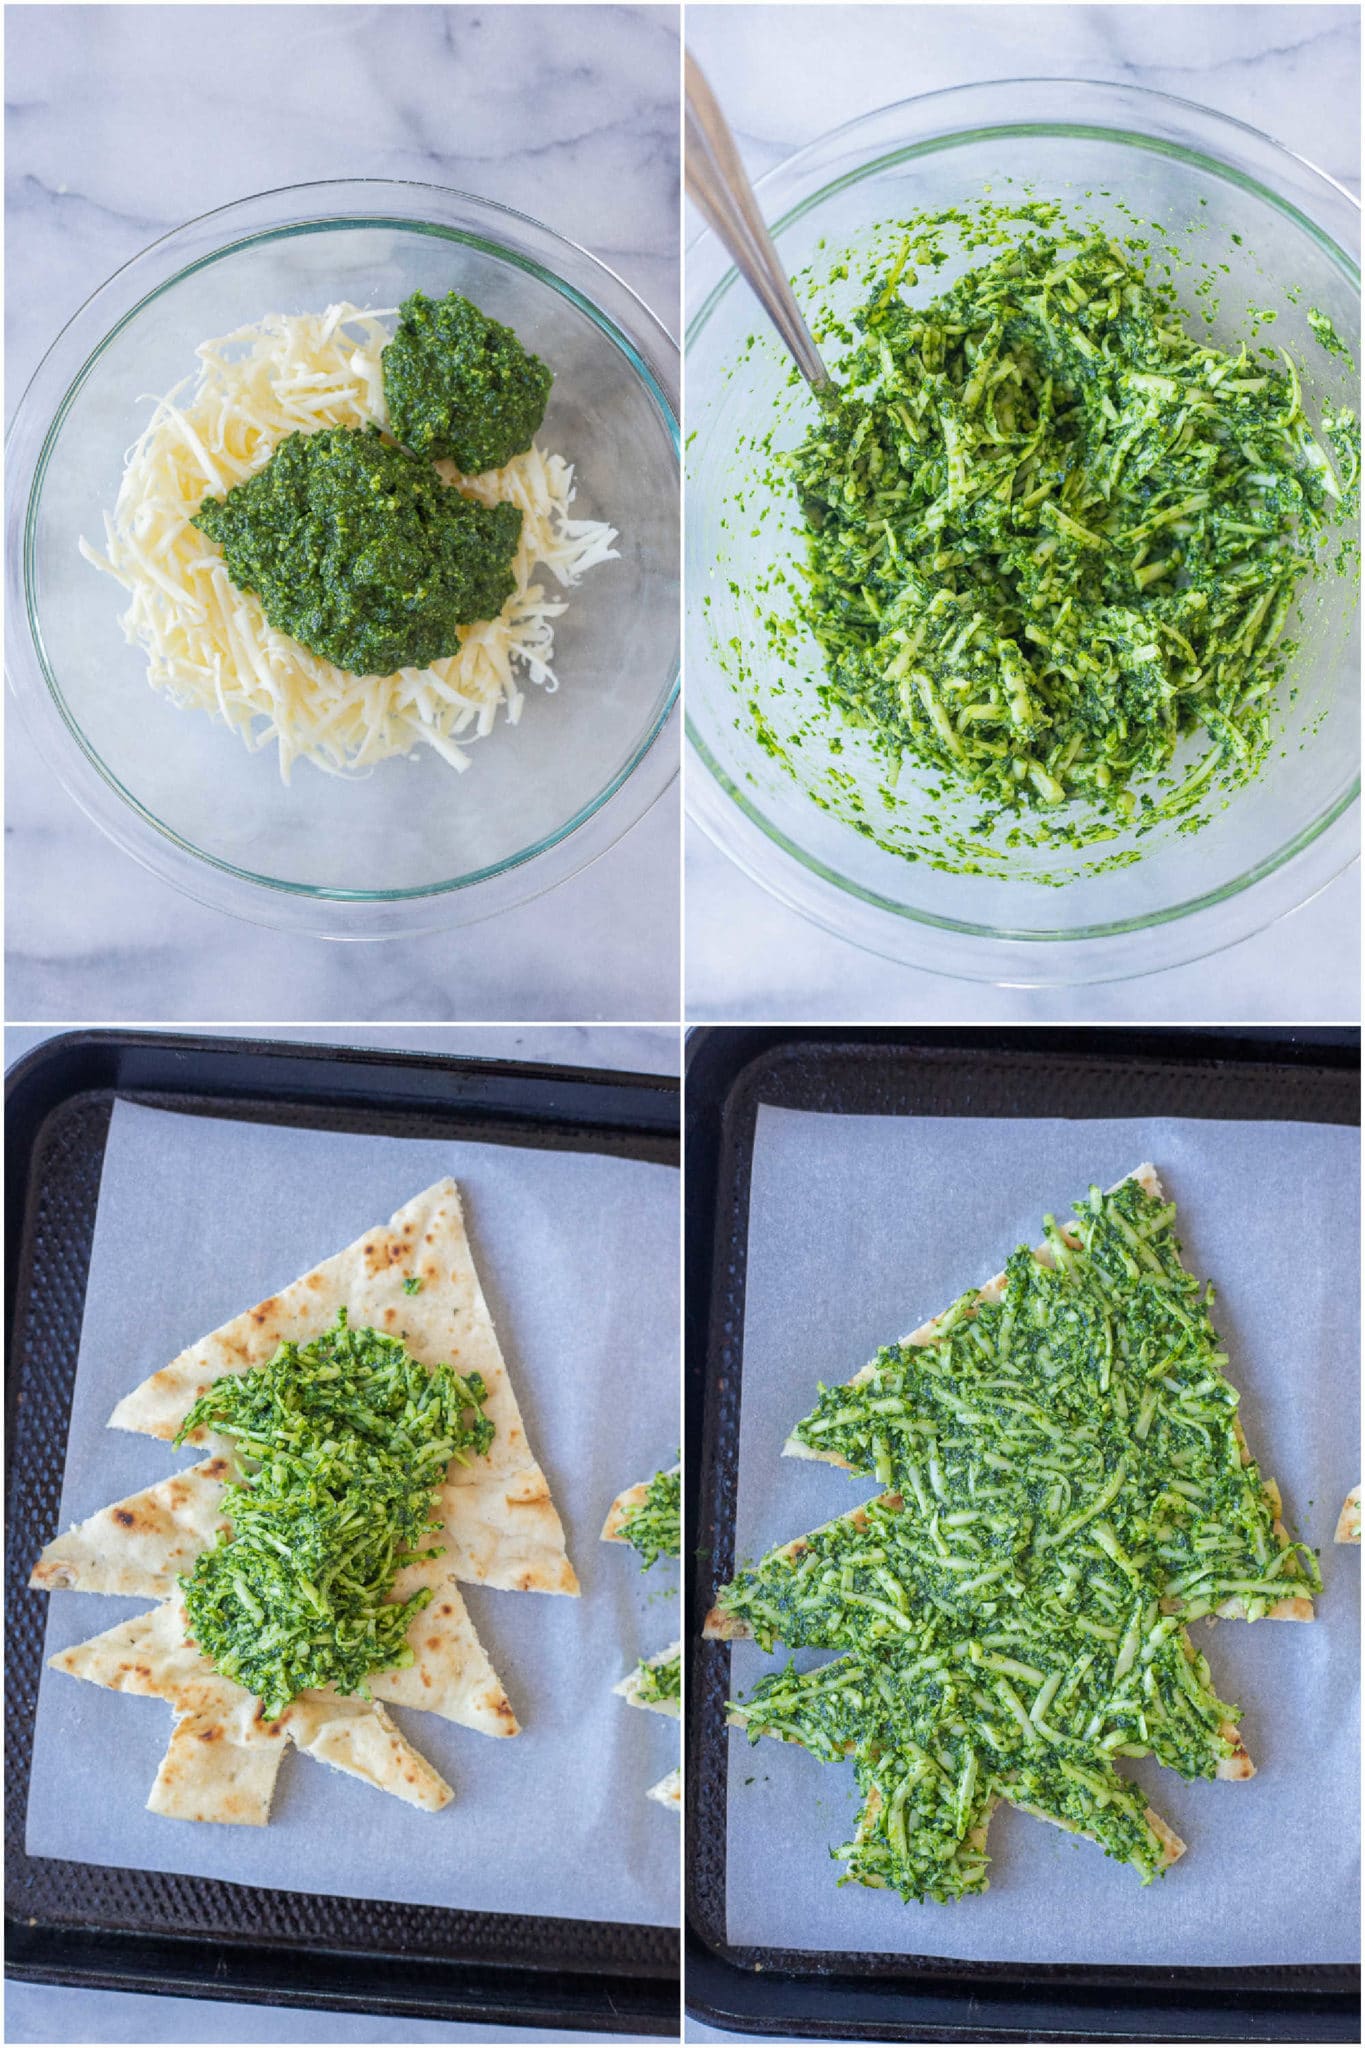 showing how to mix the cheese and pesto together to make the green cheesy pesto topping